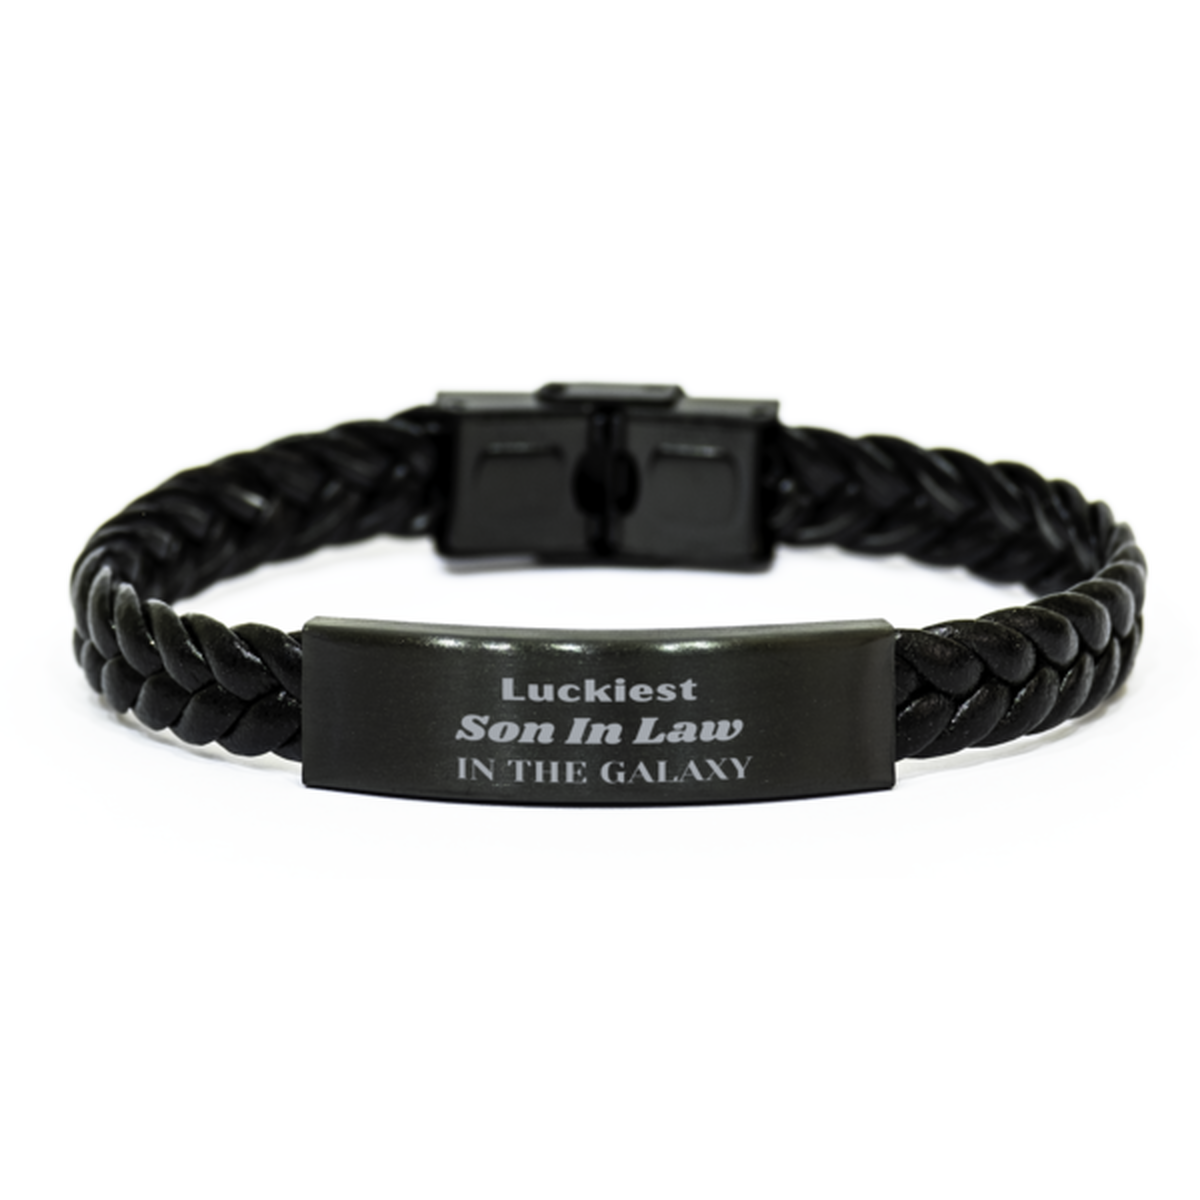 Luckiest Son In Law in the Galaxy, To My Son In Law Engraved Gifts, Christmas Son In Law Braided Leather Bracelet Gifts, X-mas Birthday Unique Gifts For Son In Law Men Women